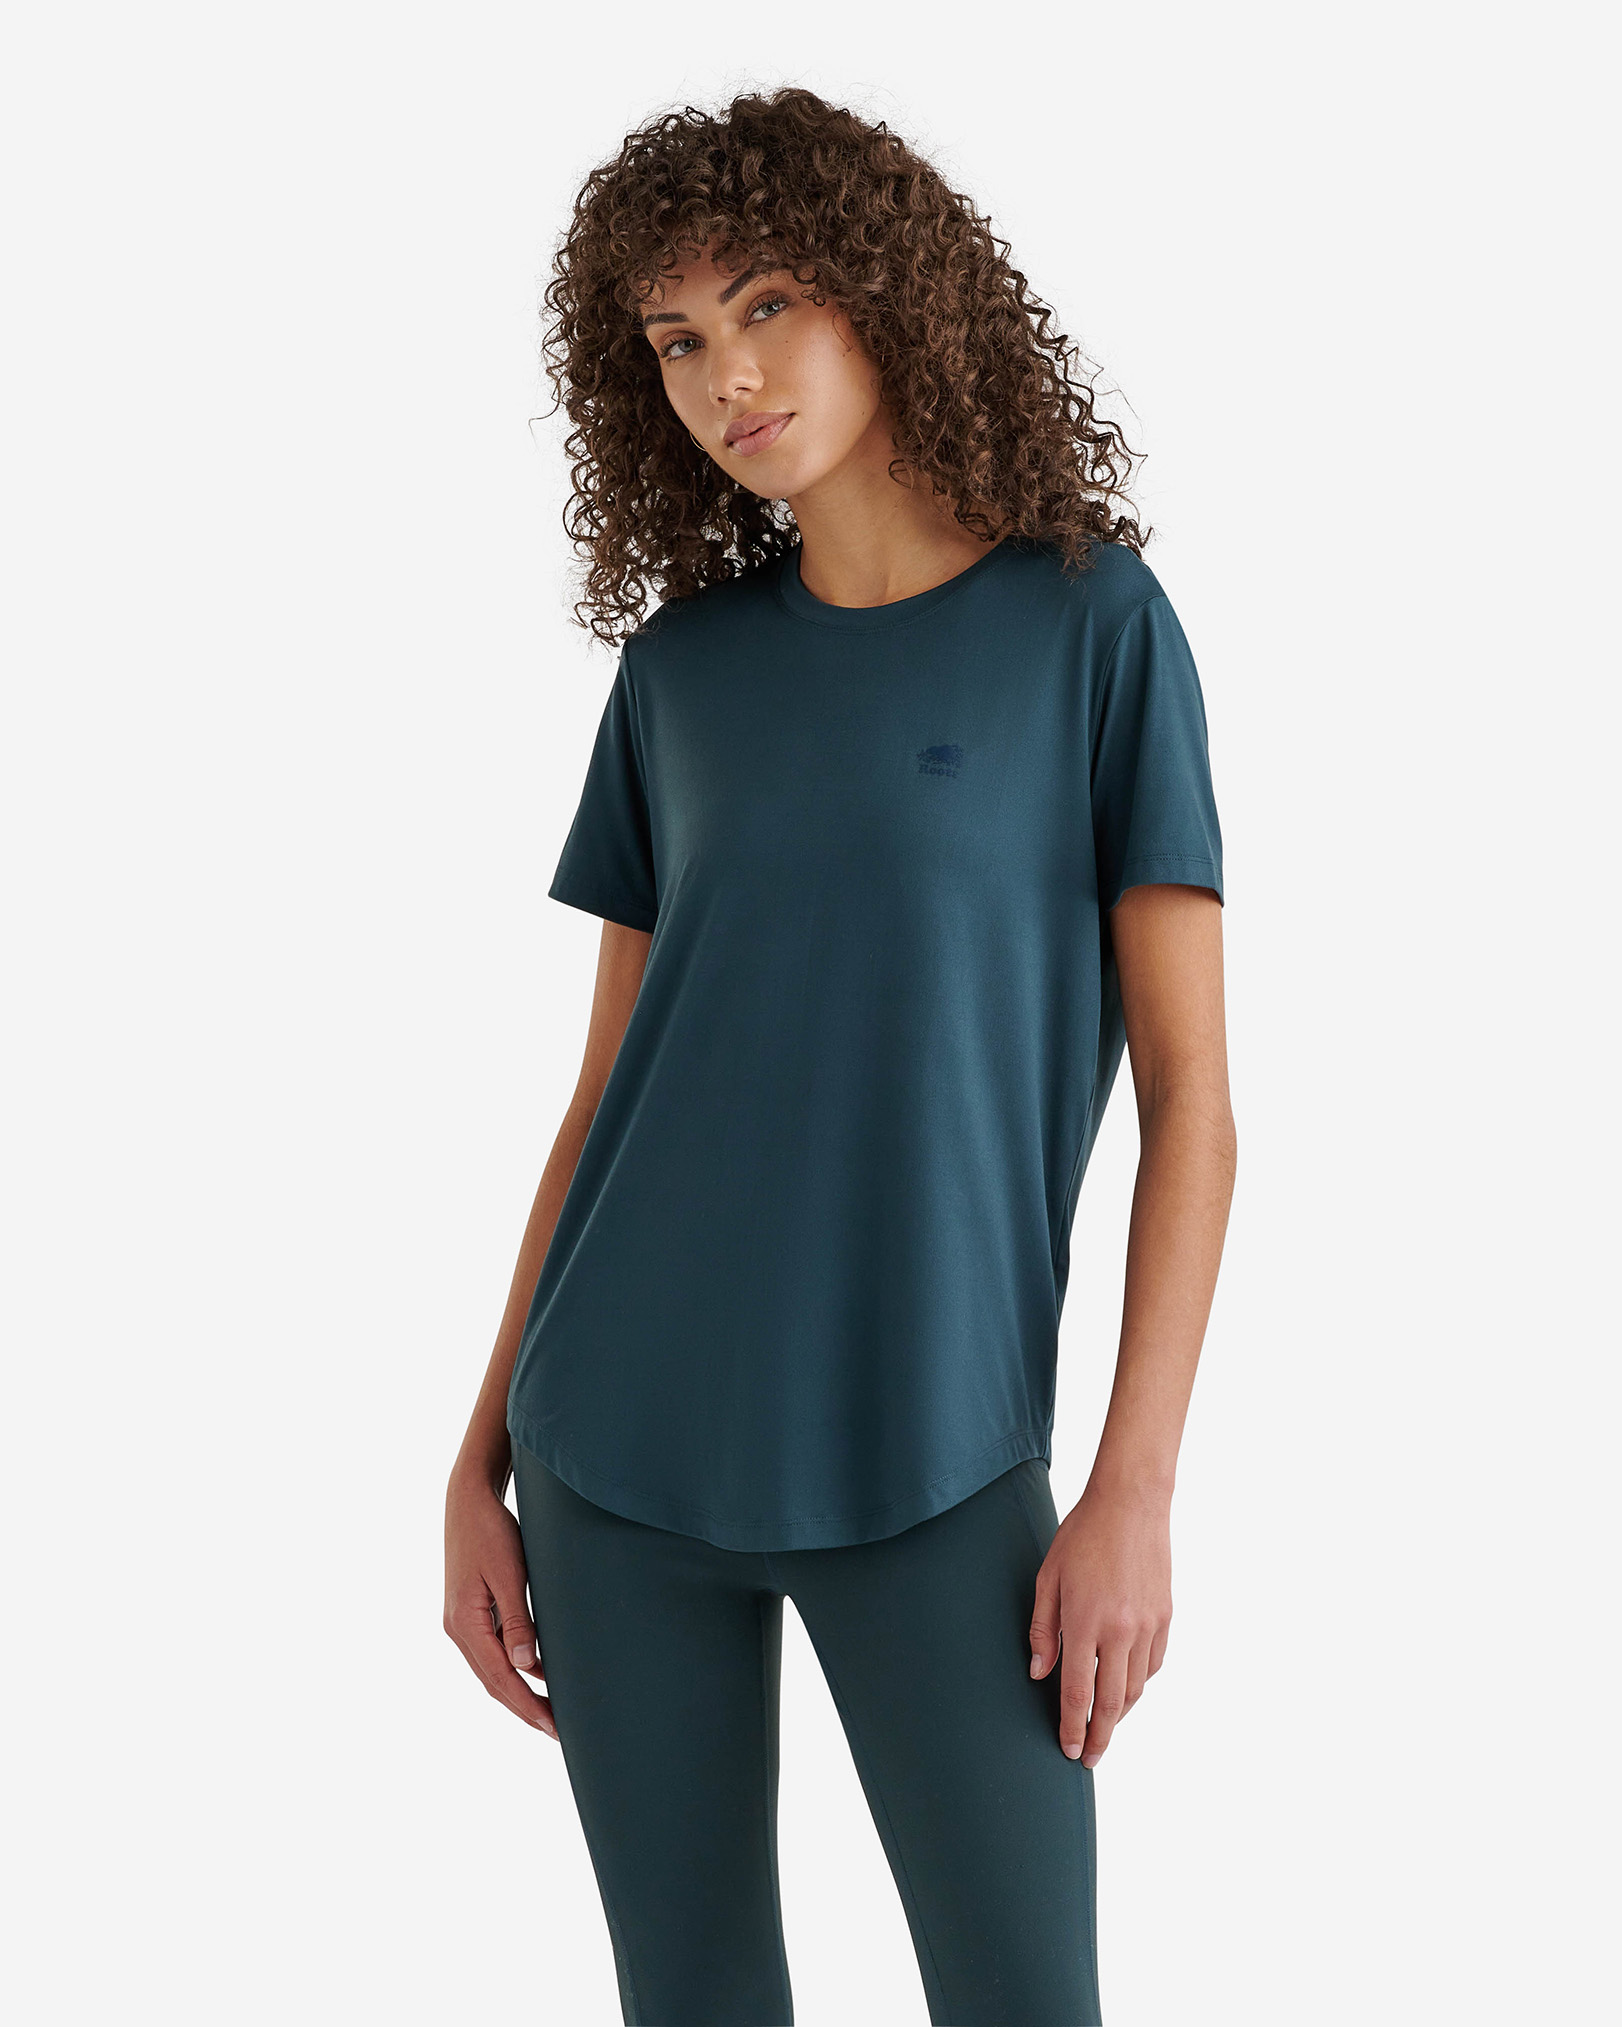 Roots Renew Short Sleeve Top in Forest Teal